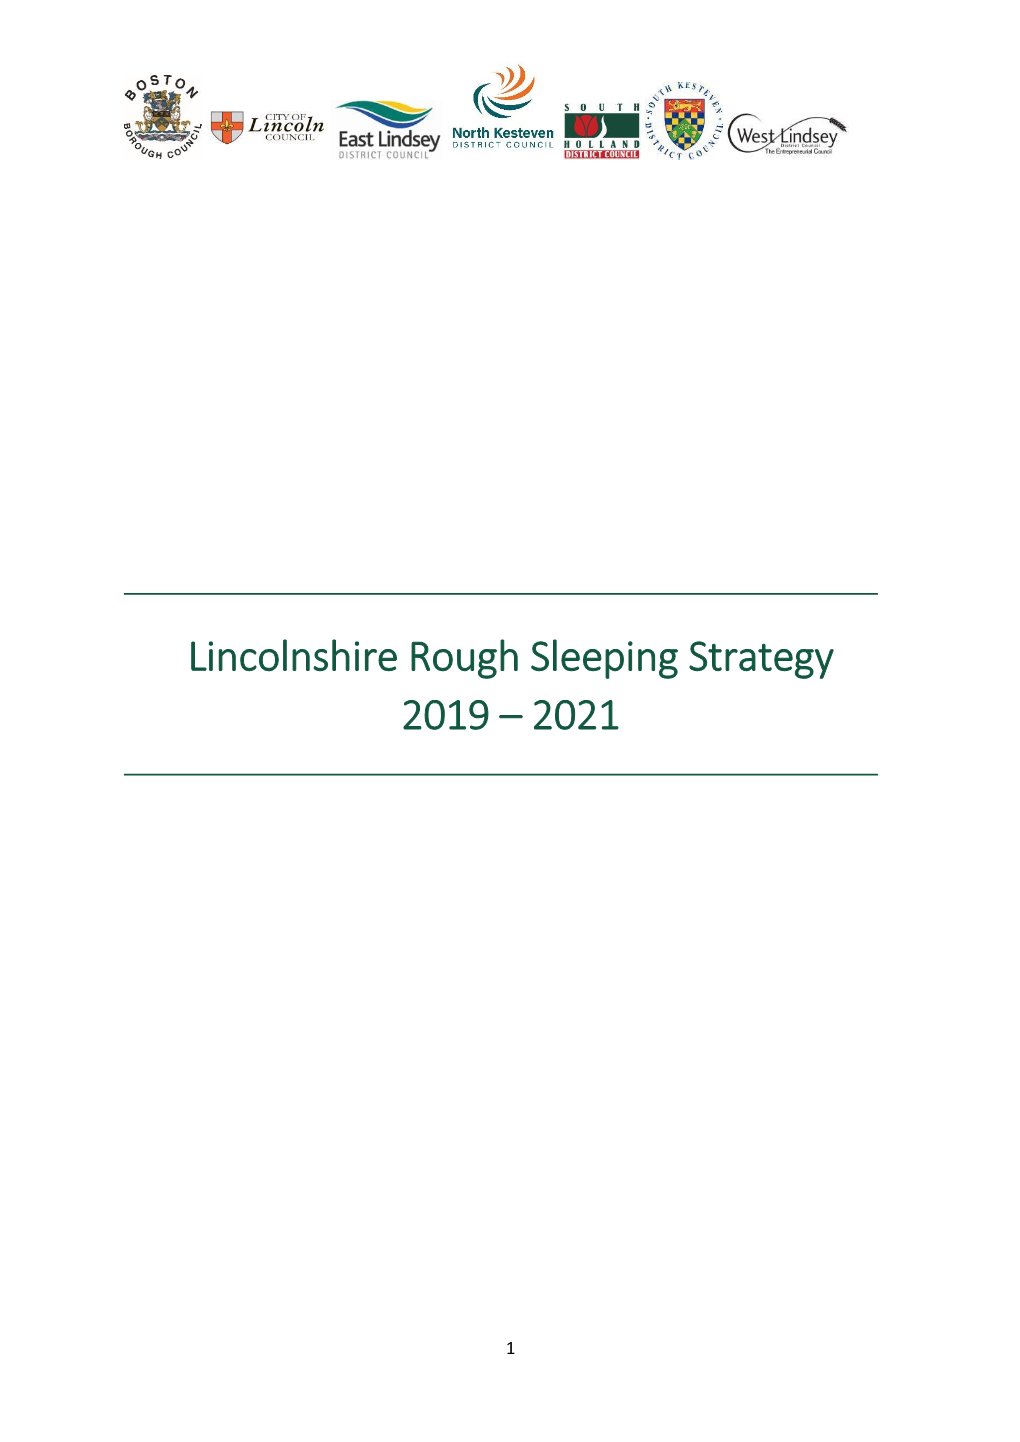 Lincolnshire Rough Sleeping Strategy 2019 – 2021